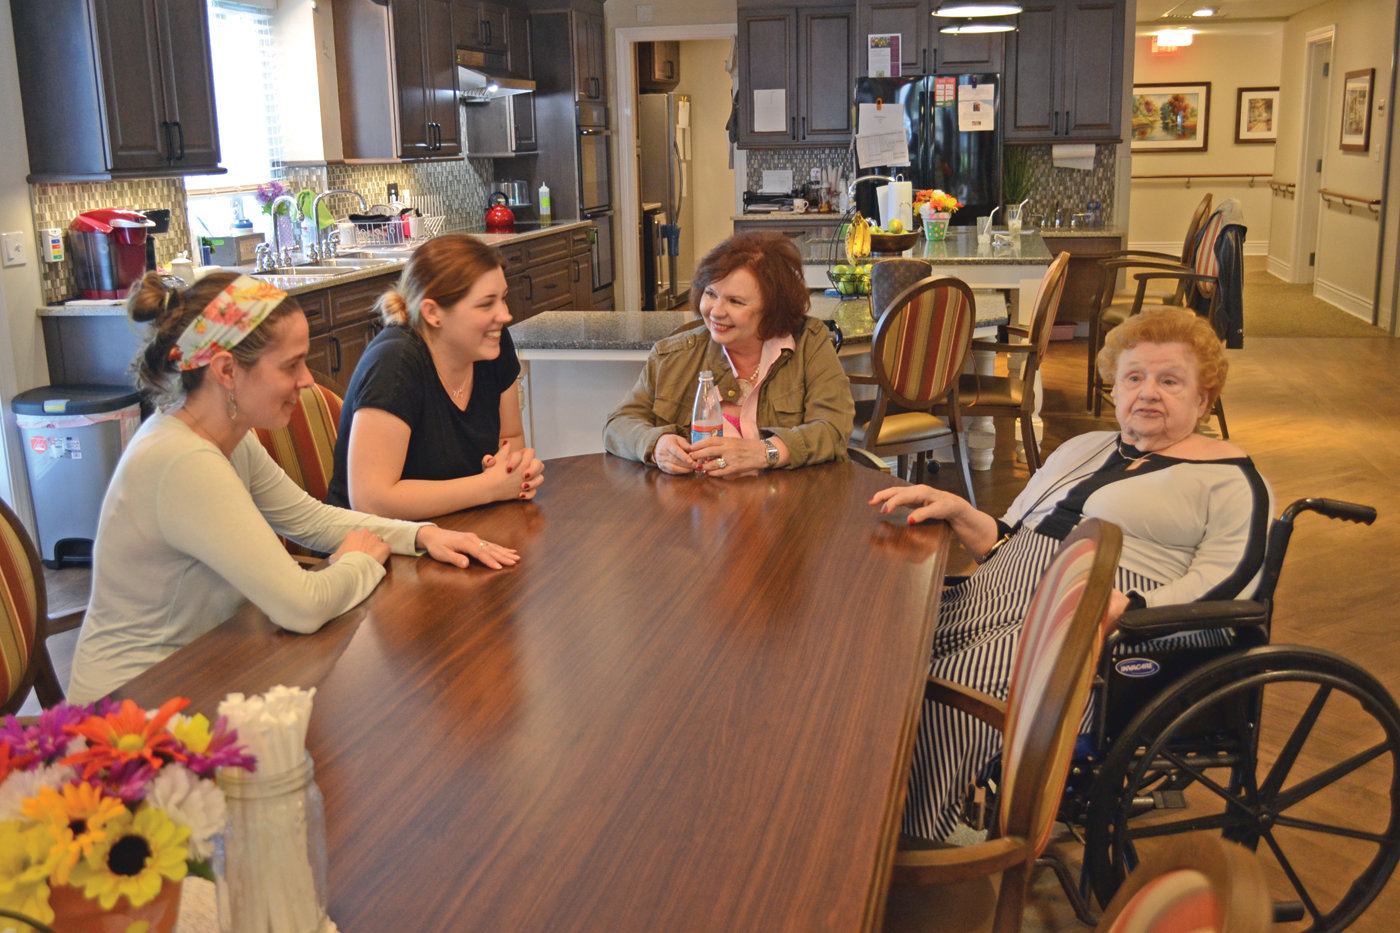 FAMILY ENVIRONMENT: Saint Elizabeth Green House home guide Sarah Bowater (left), Chrissy Yuras, Cheryl Prior and Green House home resident Claire Hill chat at the dinner table of one of Saint Elizabeth Community’s Green House homes.